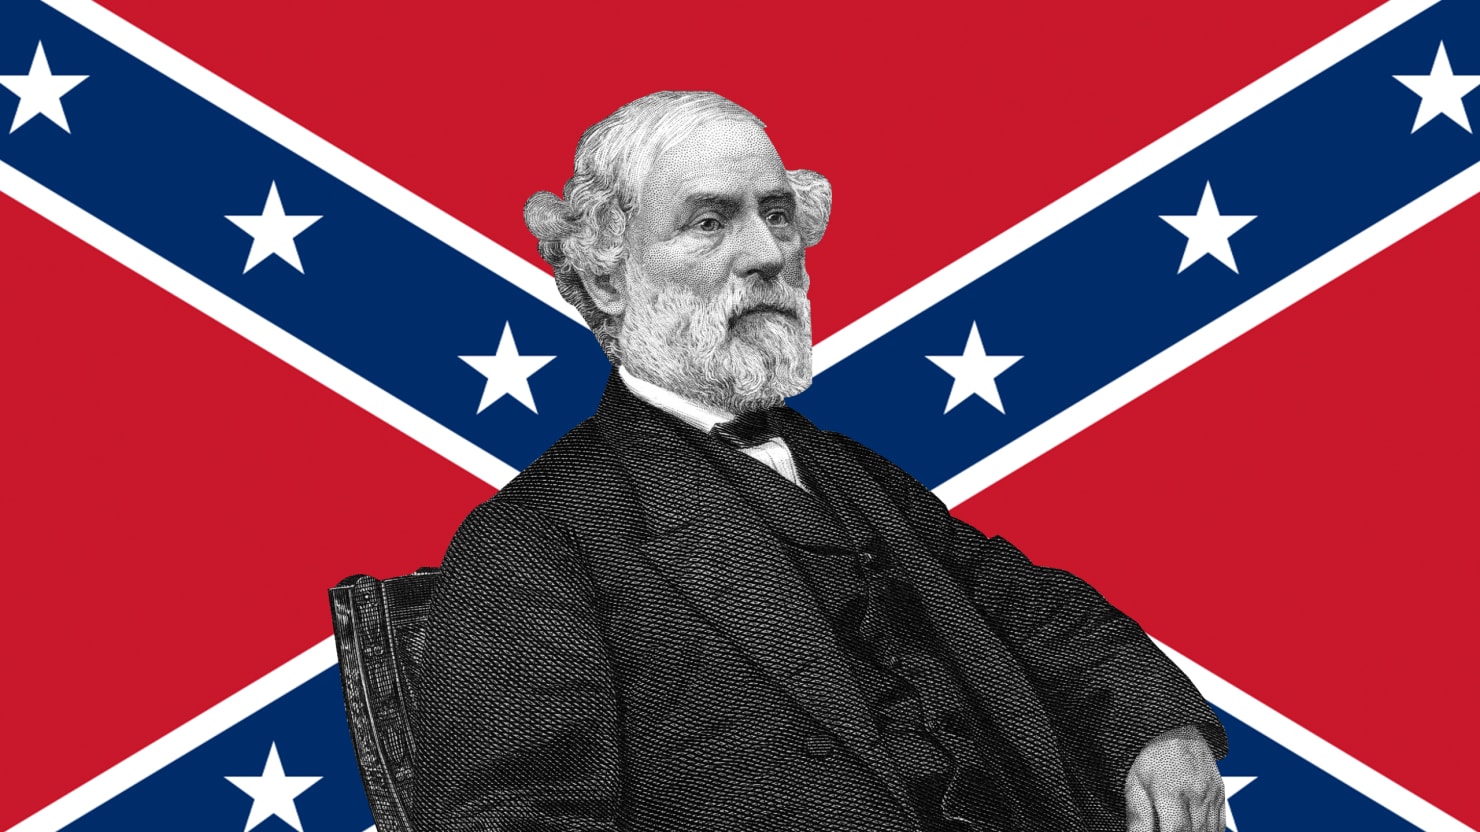 Even Robert E. Lee Wanted the Confederate Flag Gone